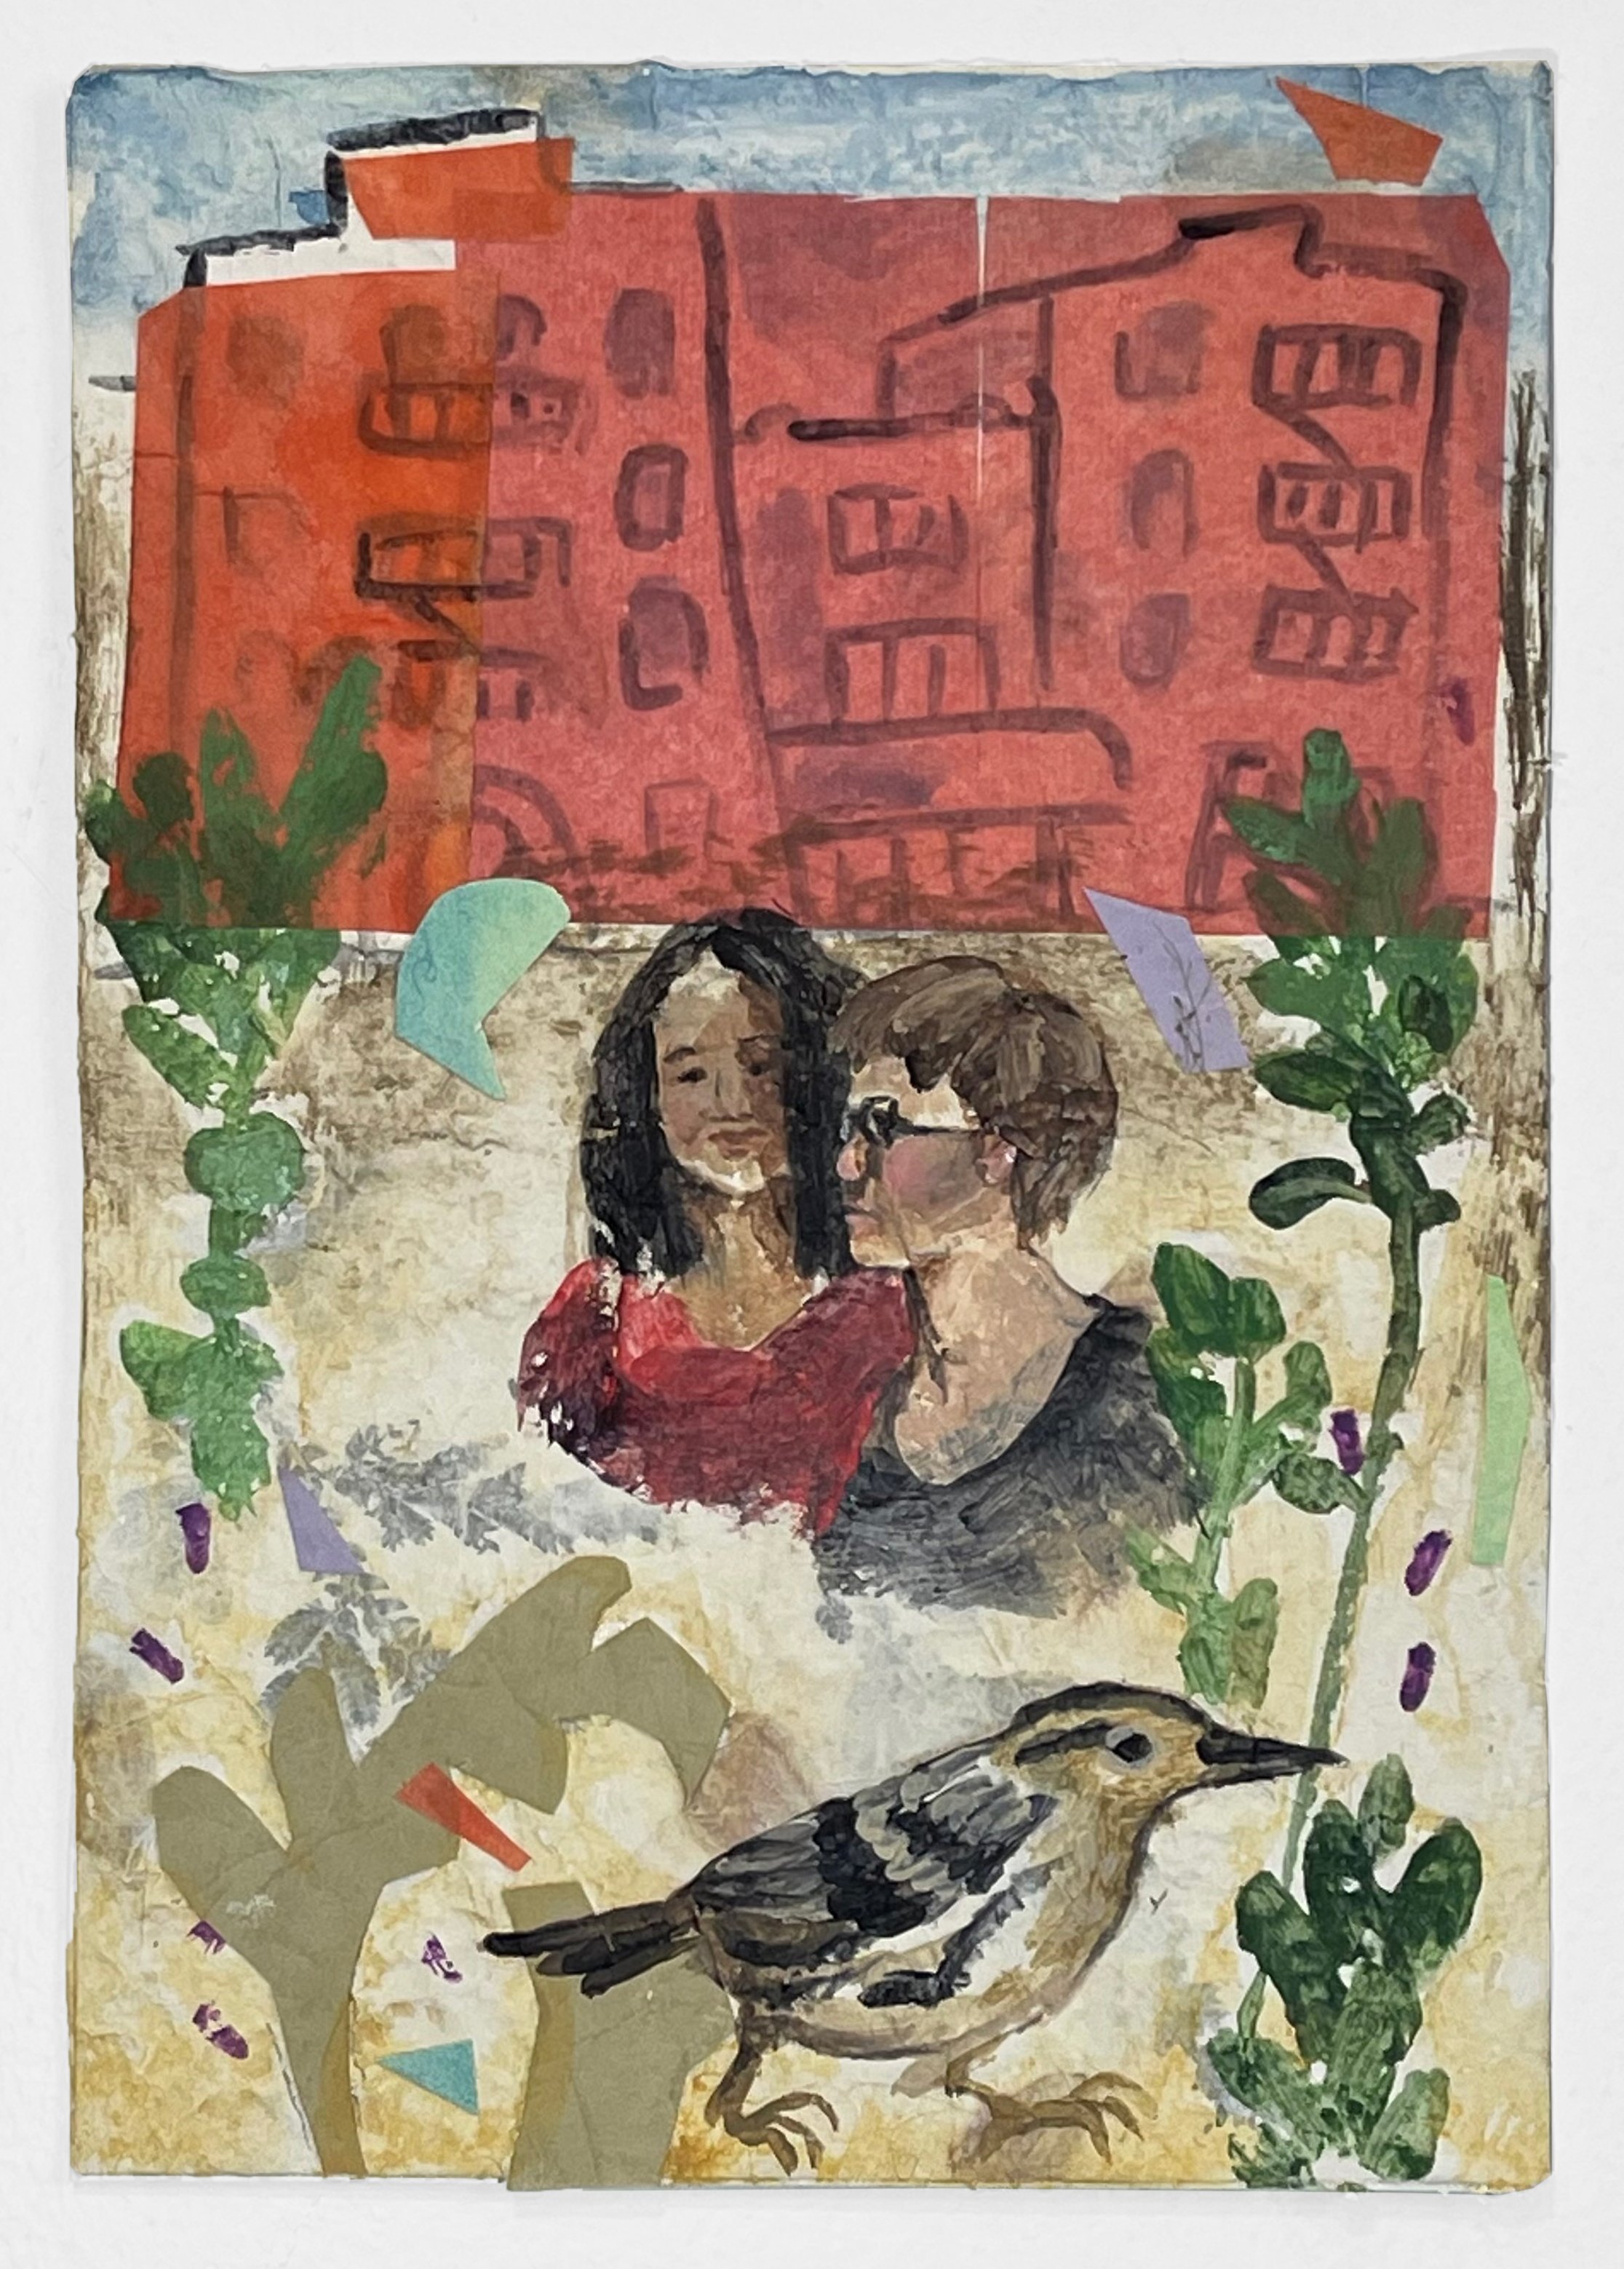  "Parkside Encounter", 9.5”h x 6.5”w, Acrylic and collage on paper with pressed flowers, 2023   